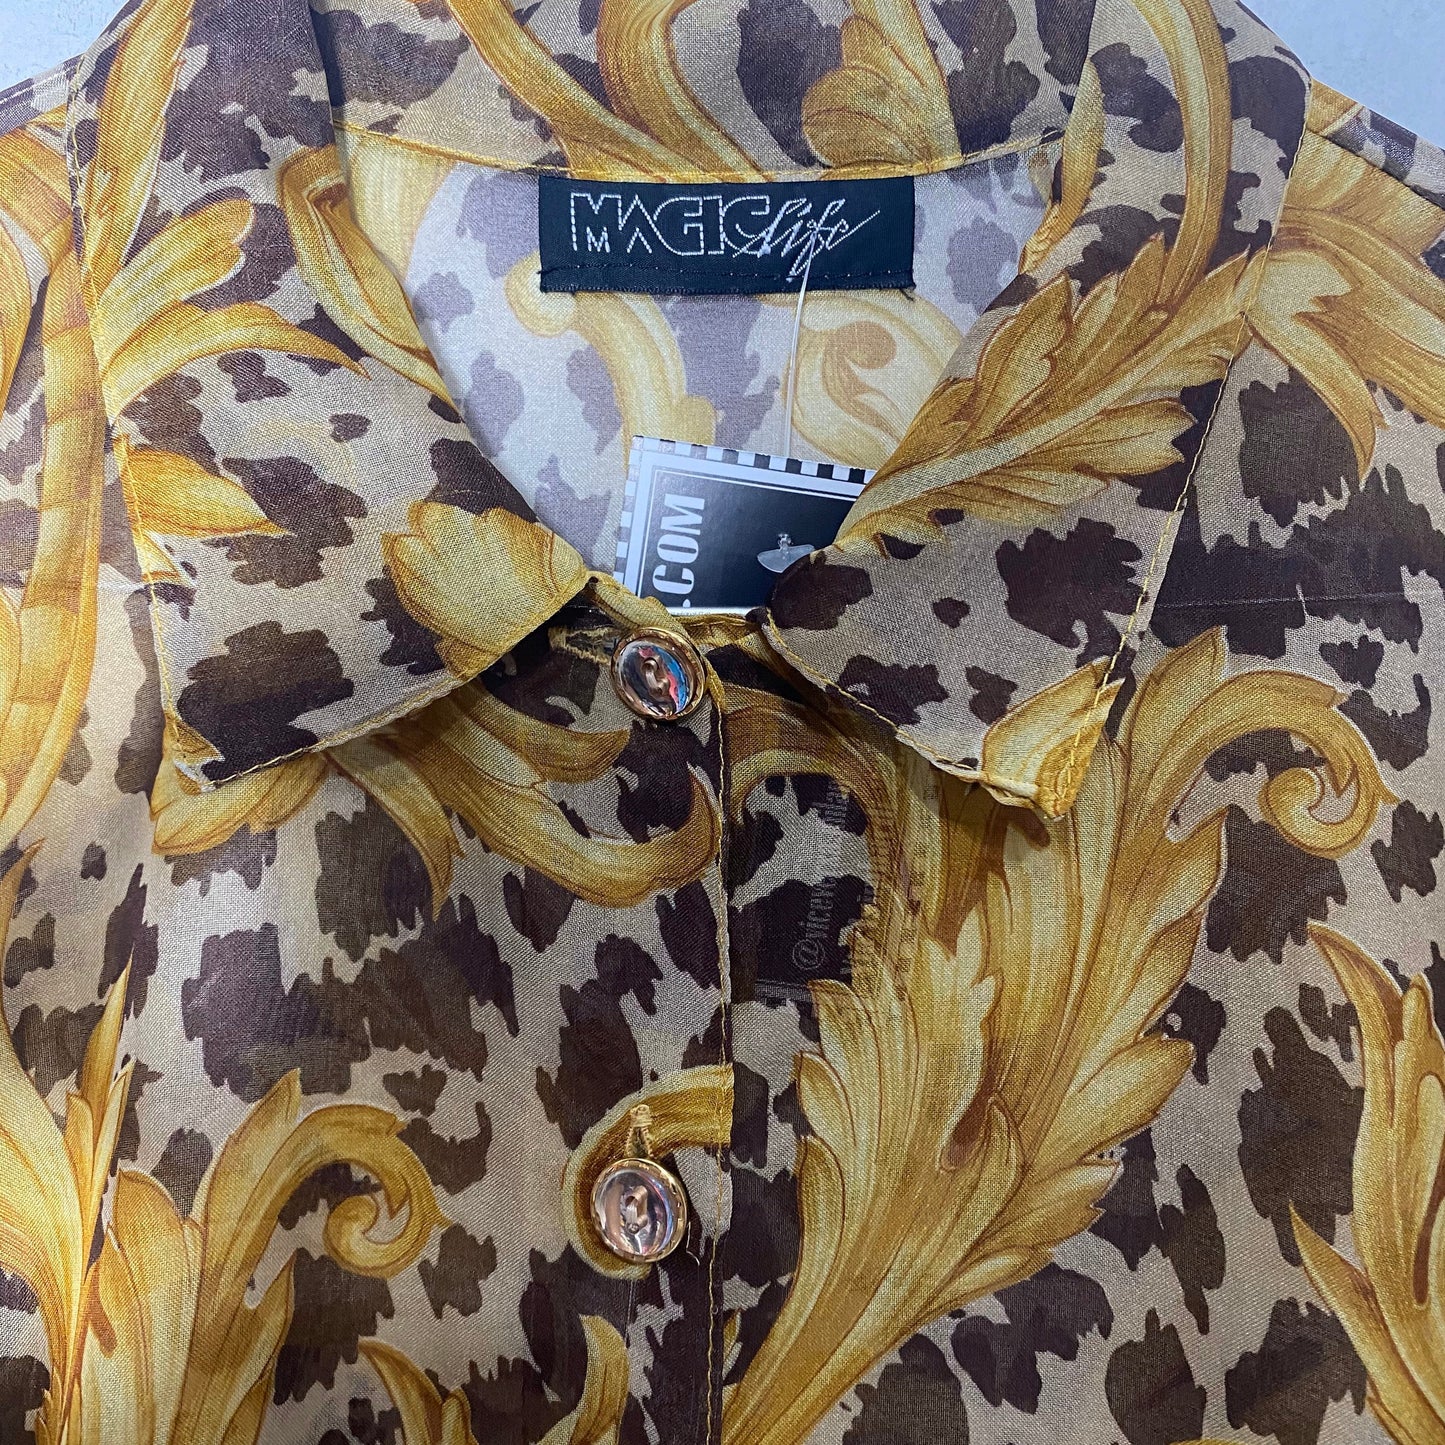 Baroque Versace style cheetah / achantus leaves print shirt made in Italy by Magic life, 80s mint condition